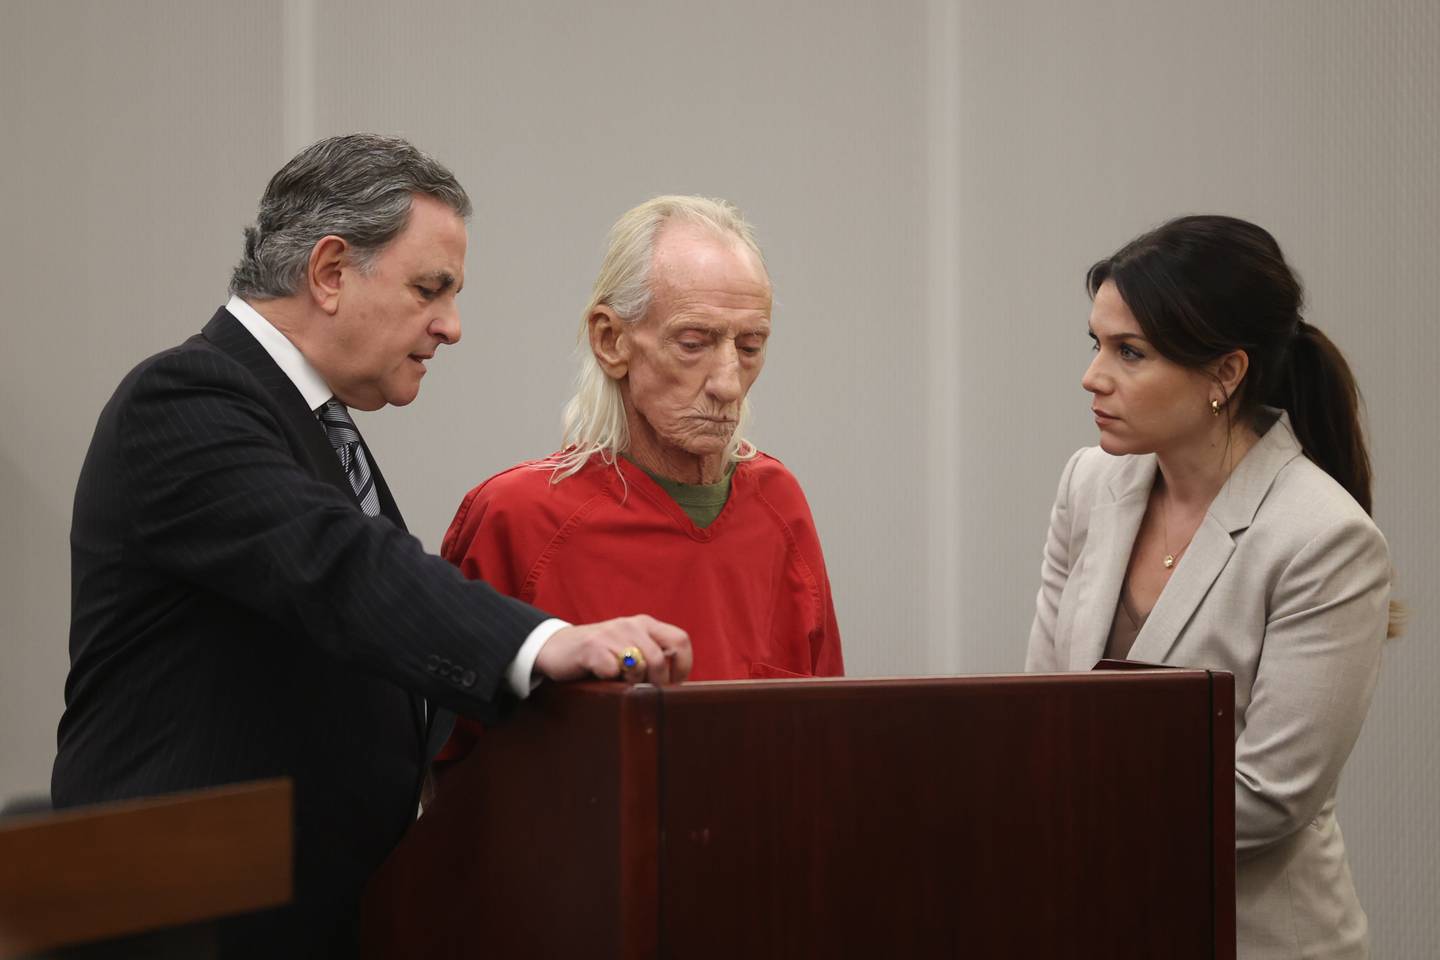 Joseph Czuba confers with his defense lawyers, George Lenard, left, and Kylie Blatti for a hearing at the Will County Courthouse on Monday, Oct. 30, 2023 in Joliet. Joseph Czuba, 71, was arraigned on charges of first-degree murder of 6-year-old Wadea Al-Fayoume and attempting to kill the boy's mother, Hanaan Shahin, 32, on Oct. 14 at a Plainfield Township residence.